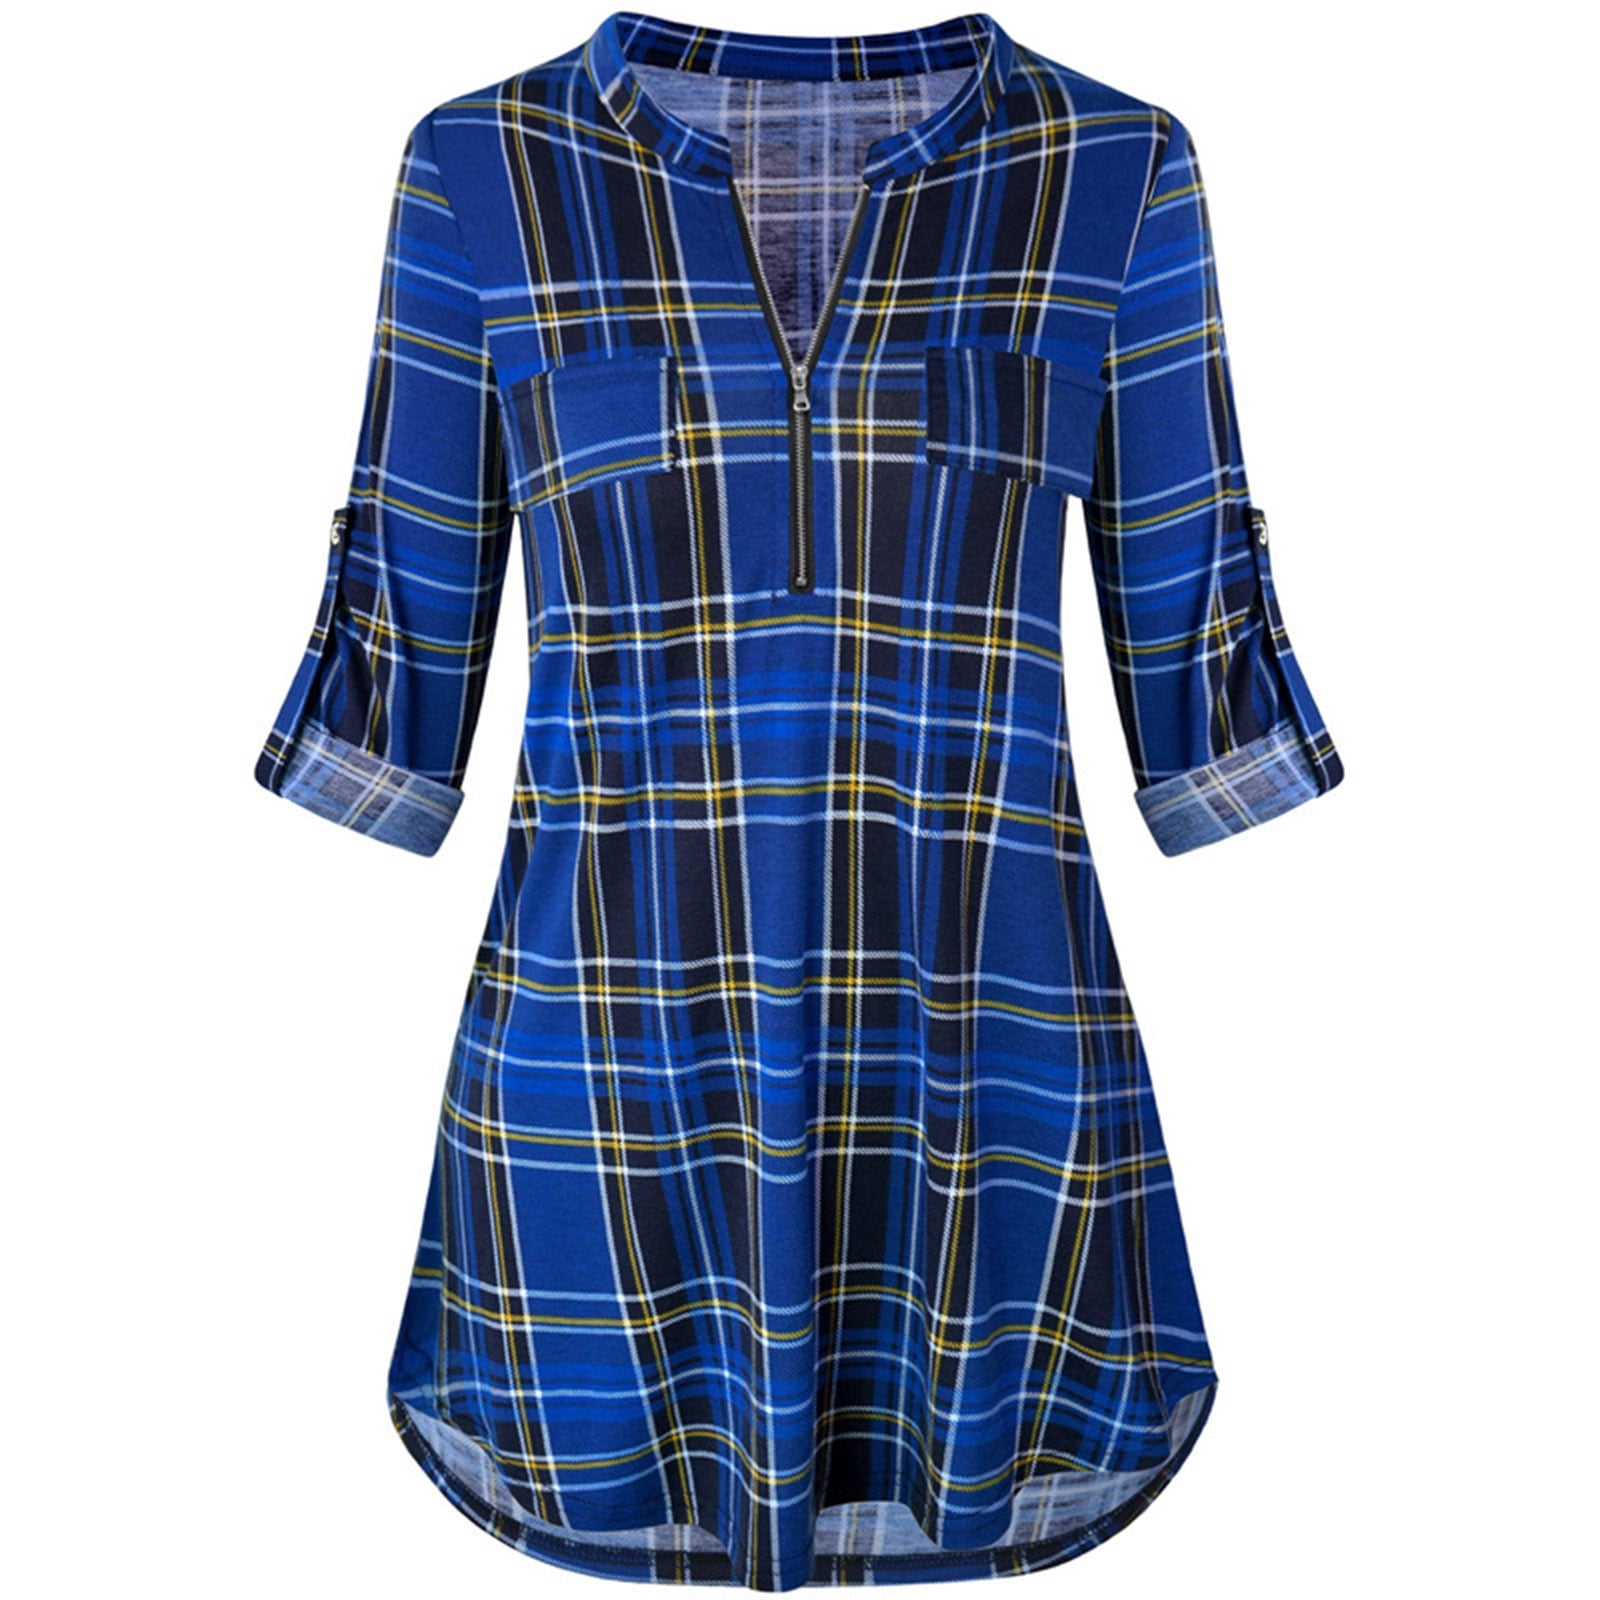 REORIAFEE Winter Tops for Women Long Sleeve Tunics Fall Blouse Plaid ...